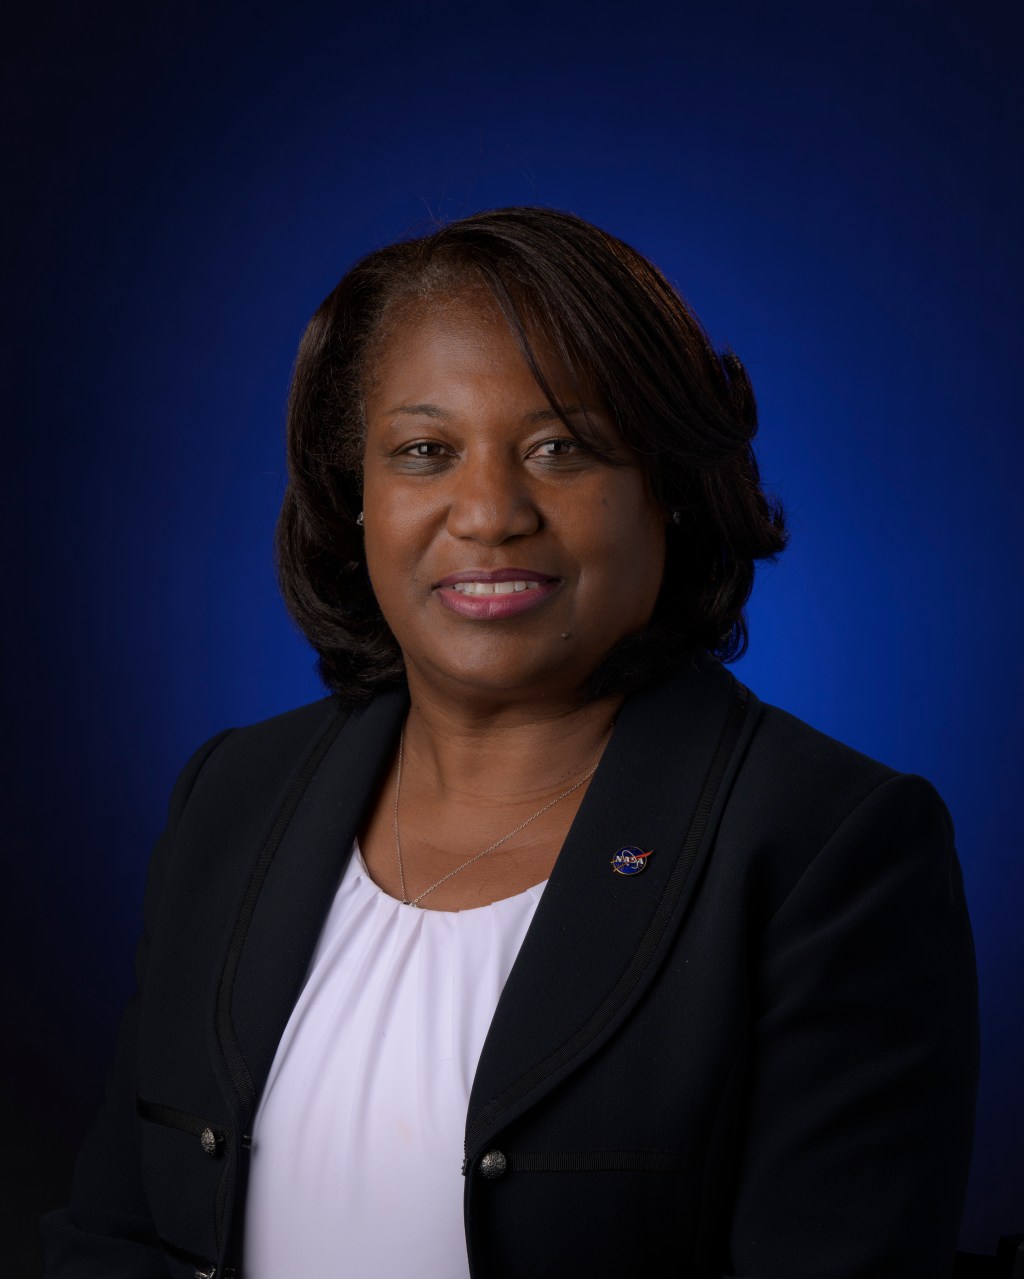 Official portrait of Tonya McNair on Tuesday, Dec. 6, 2022, at the Mary W. Jackson NASA Headquarters building in Washington.